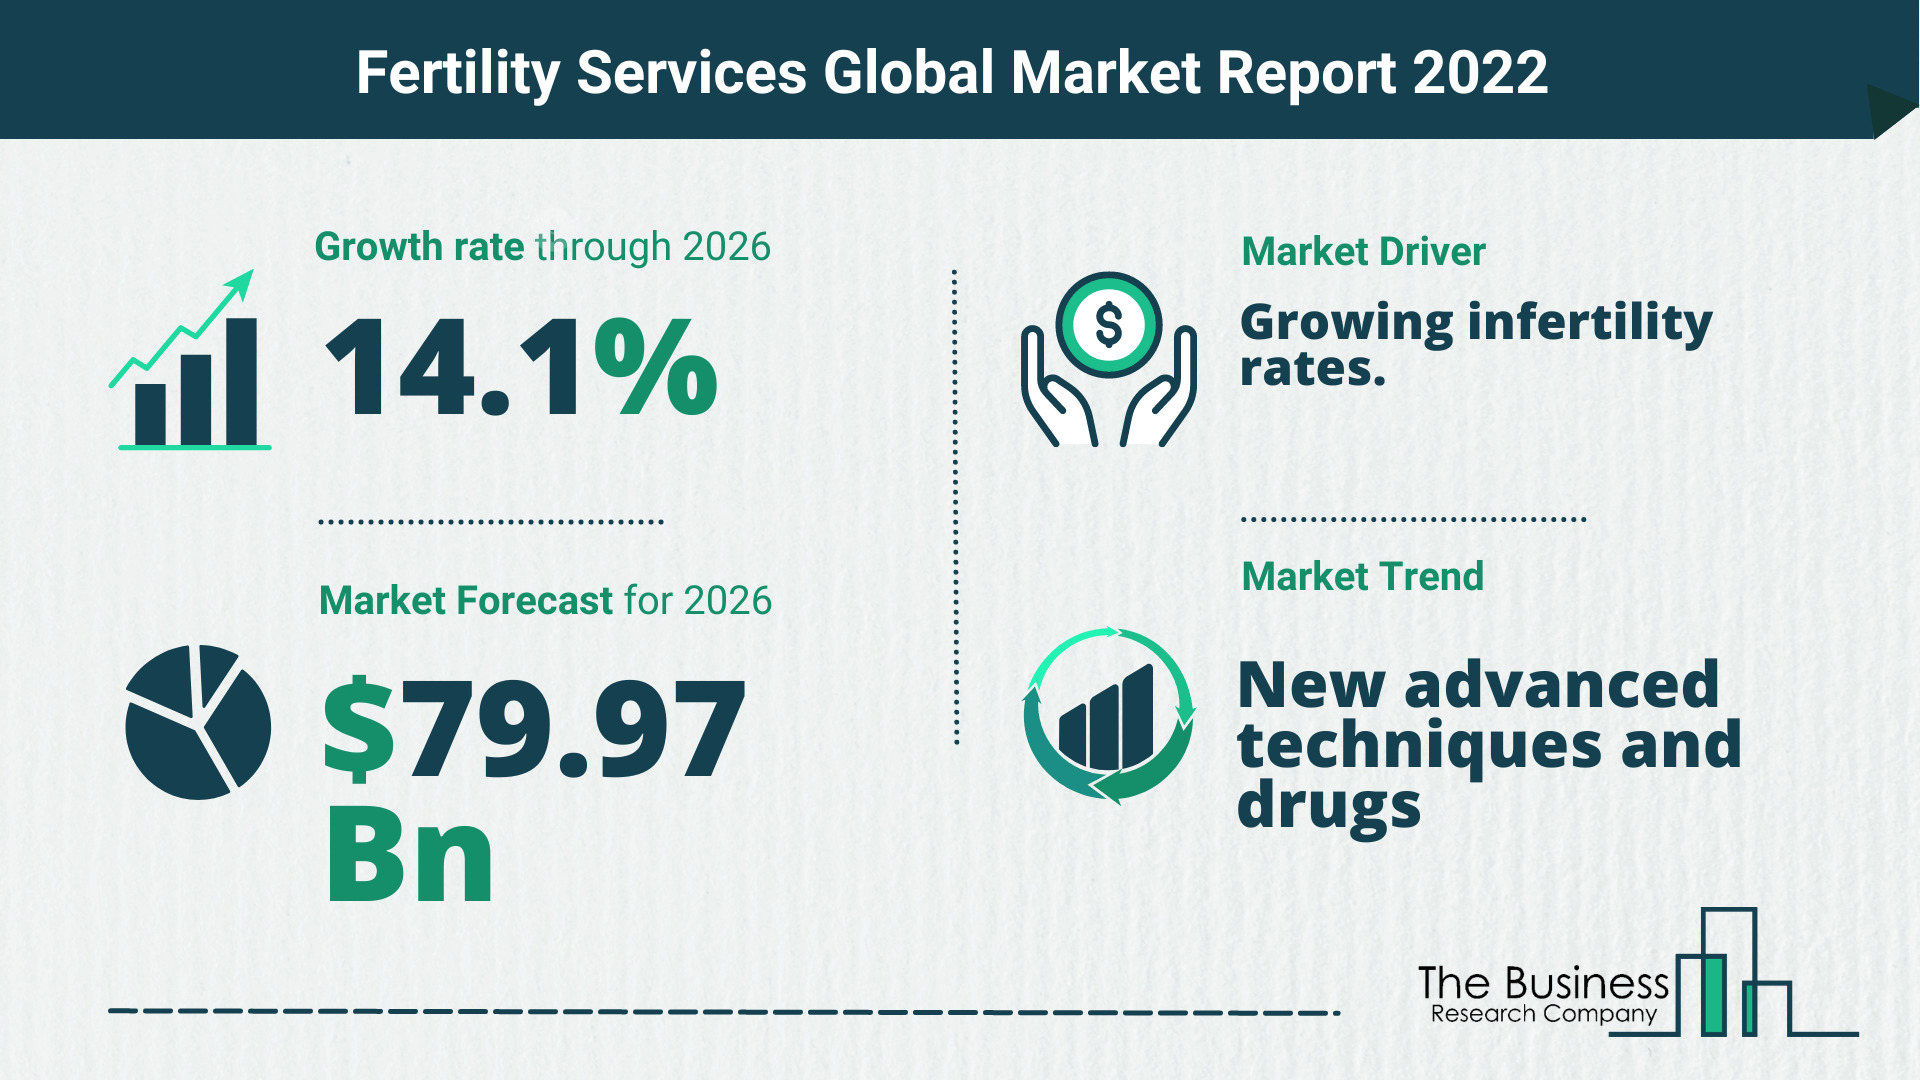 What Is The Fertility Services Market Overview In 2022?